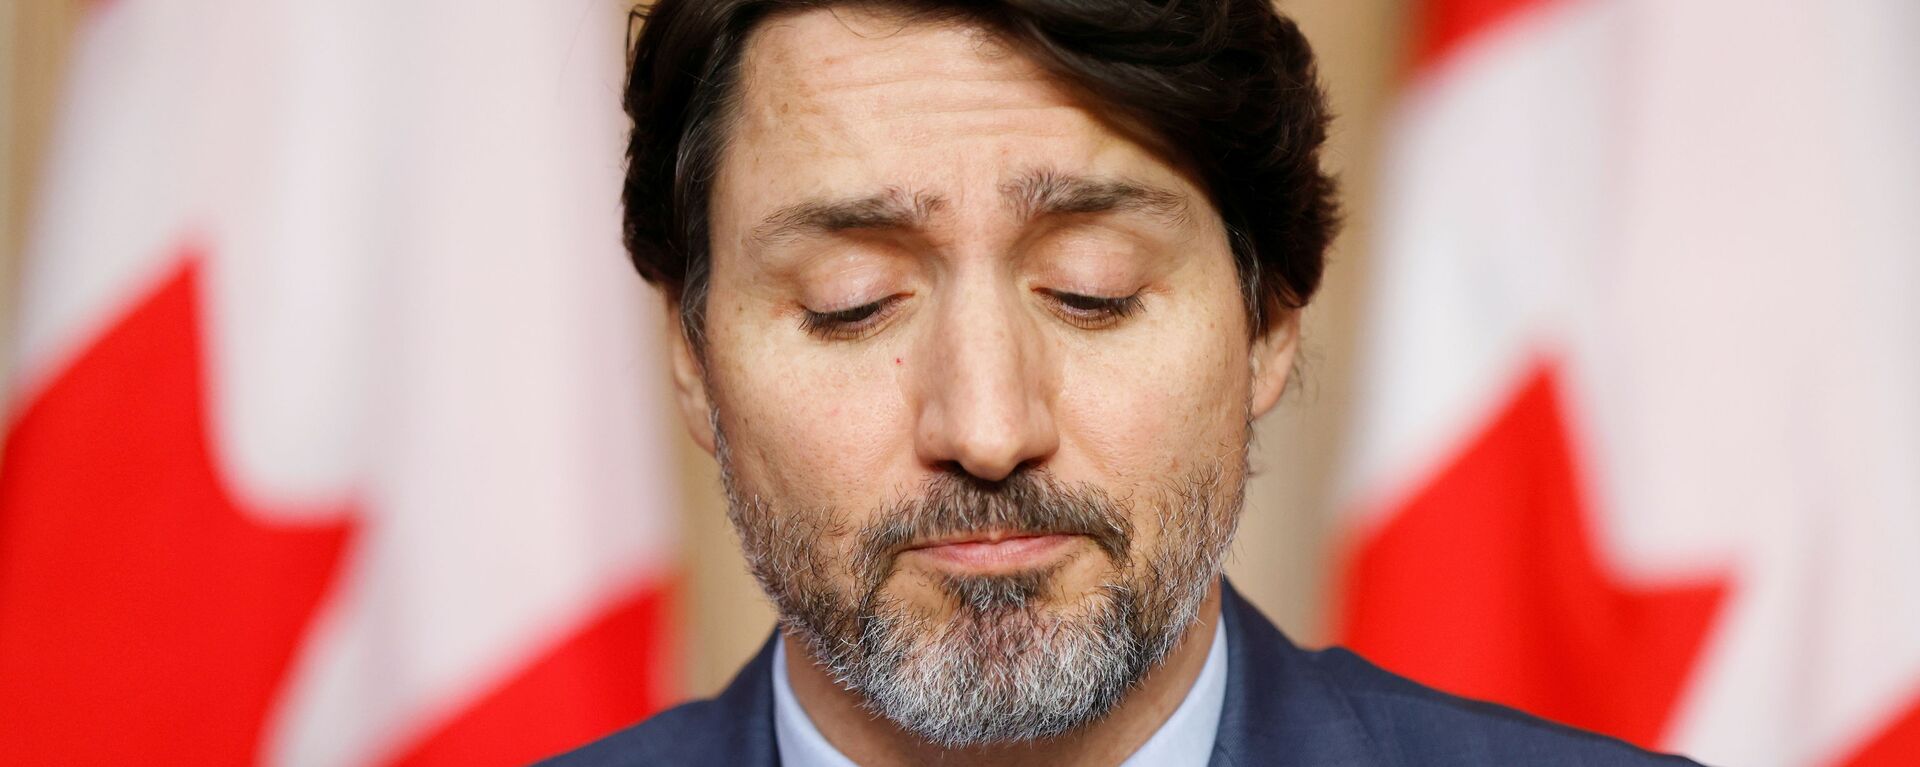 Canada's Prime Minister Justin Trudeau attends a news conference, as efforts continue to help slow the spread of the coronavirus disease (COVID-19), in Ottawa, Ontario, Canada March 19, 2021 - Sputnik Afrique, 1920, 07.07.2021